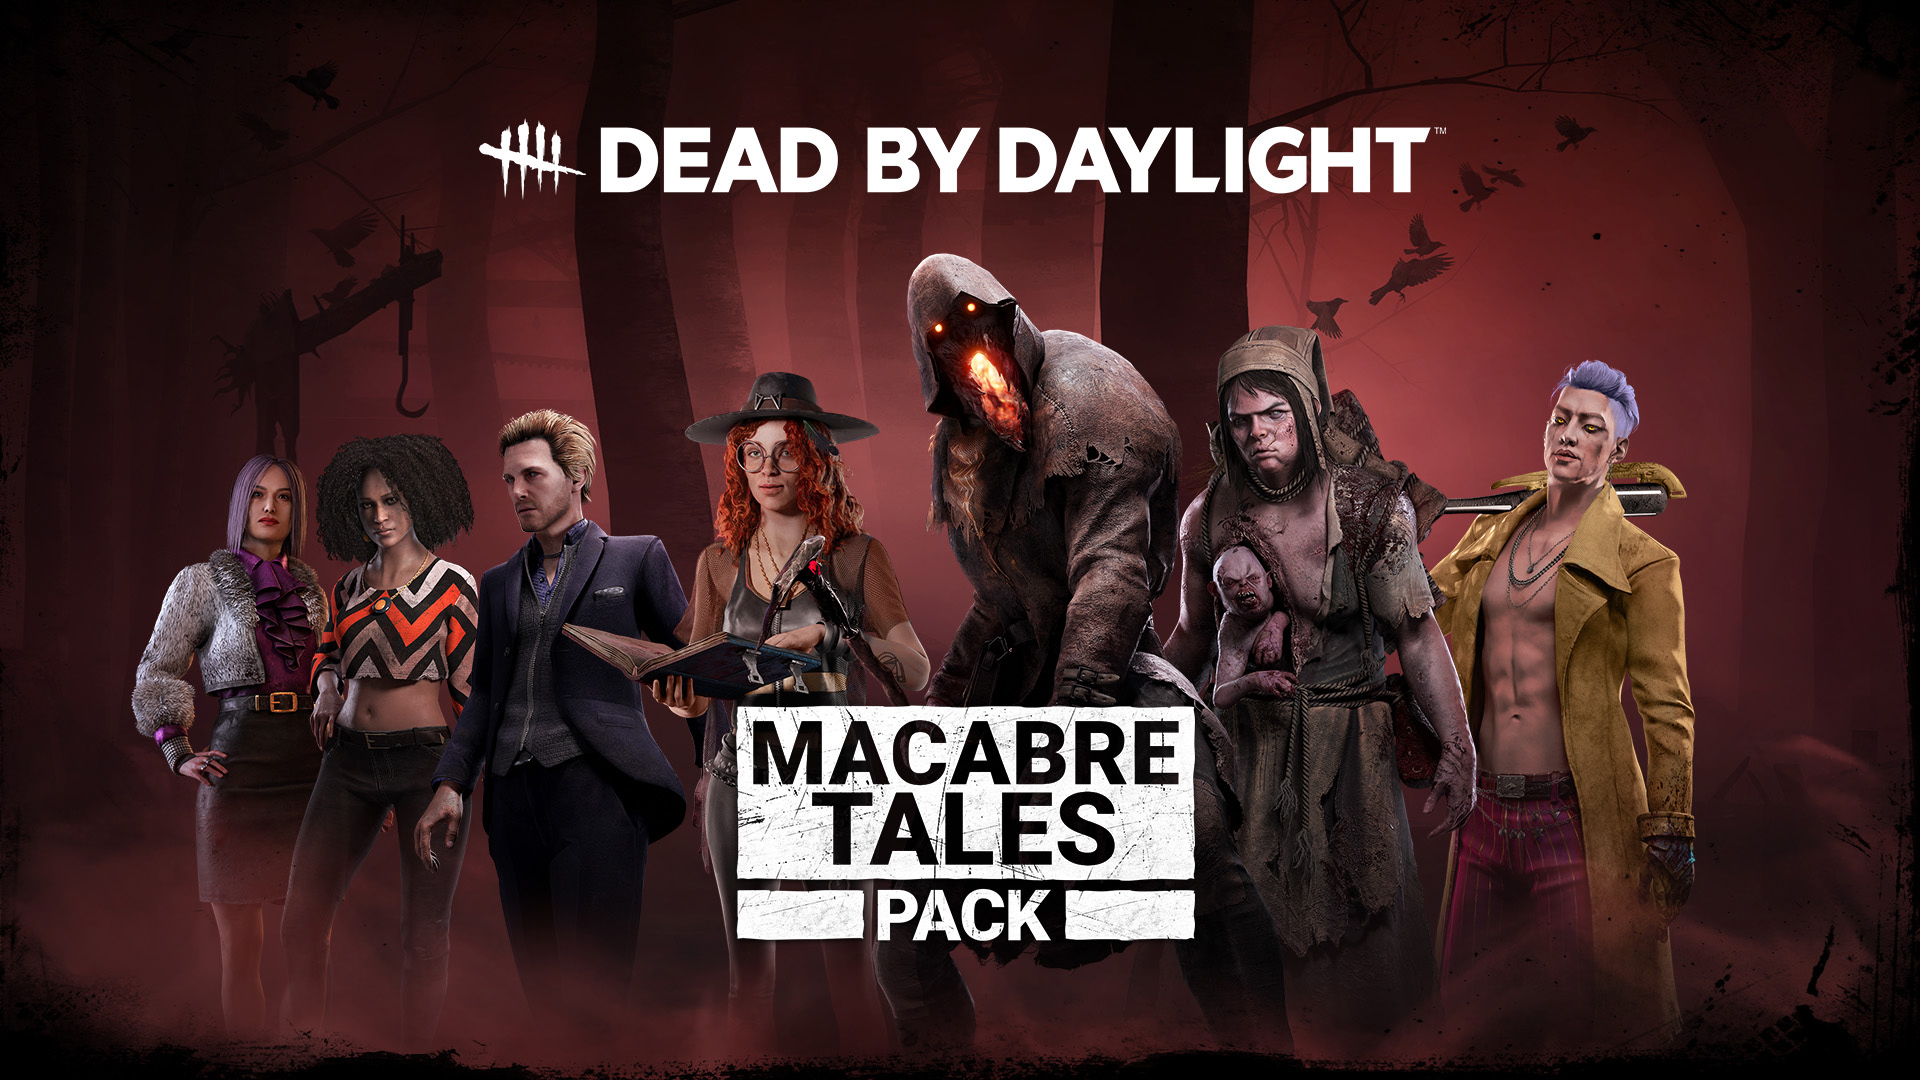 Dead by Daylight: Macabre Tales Pack